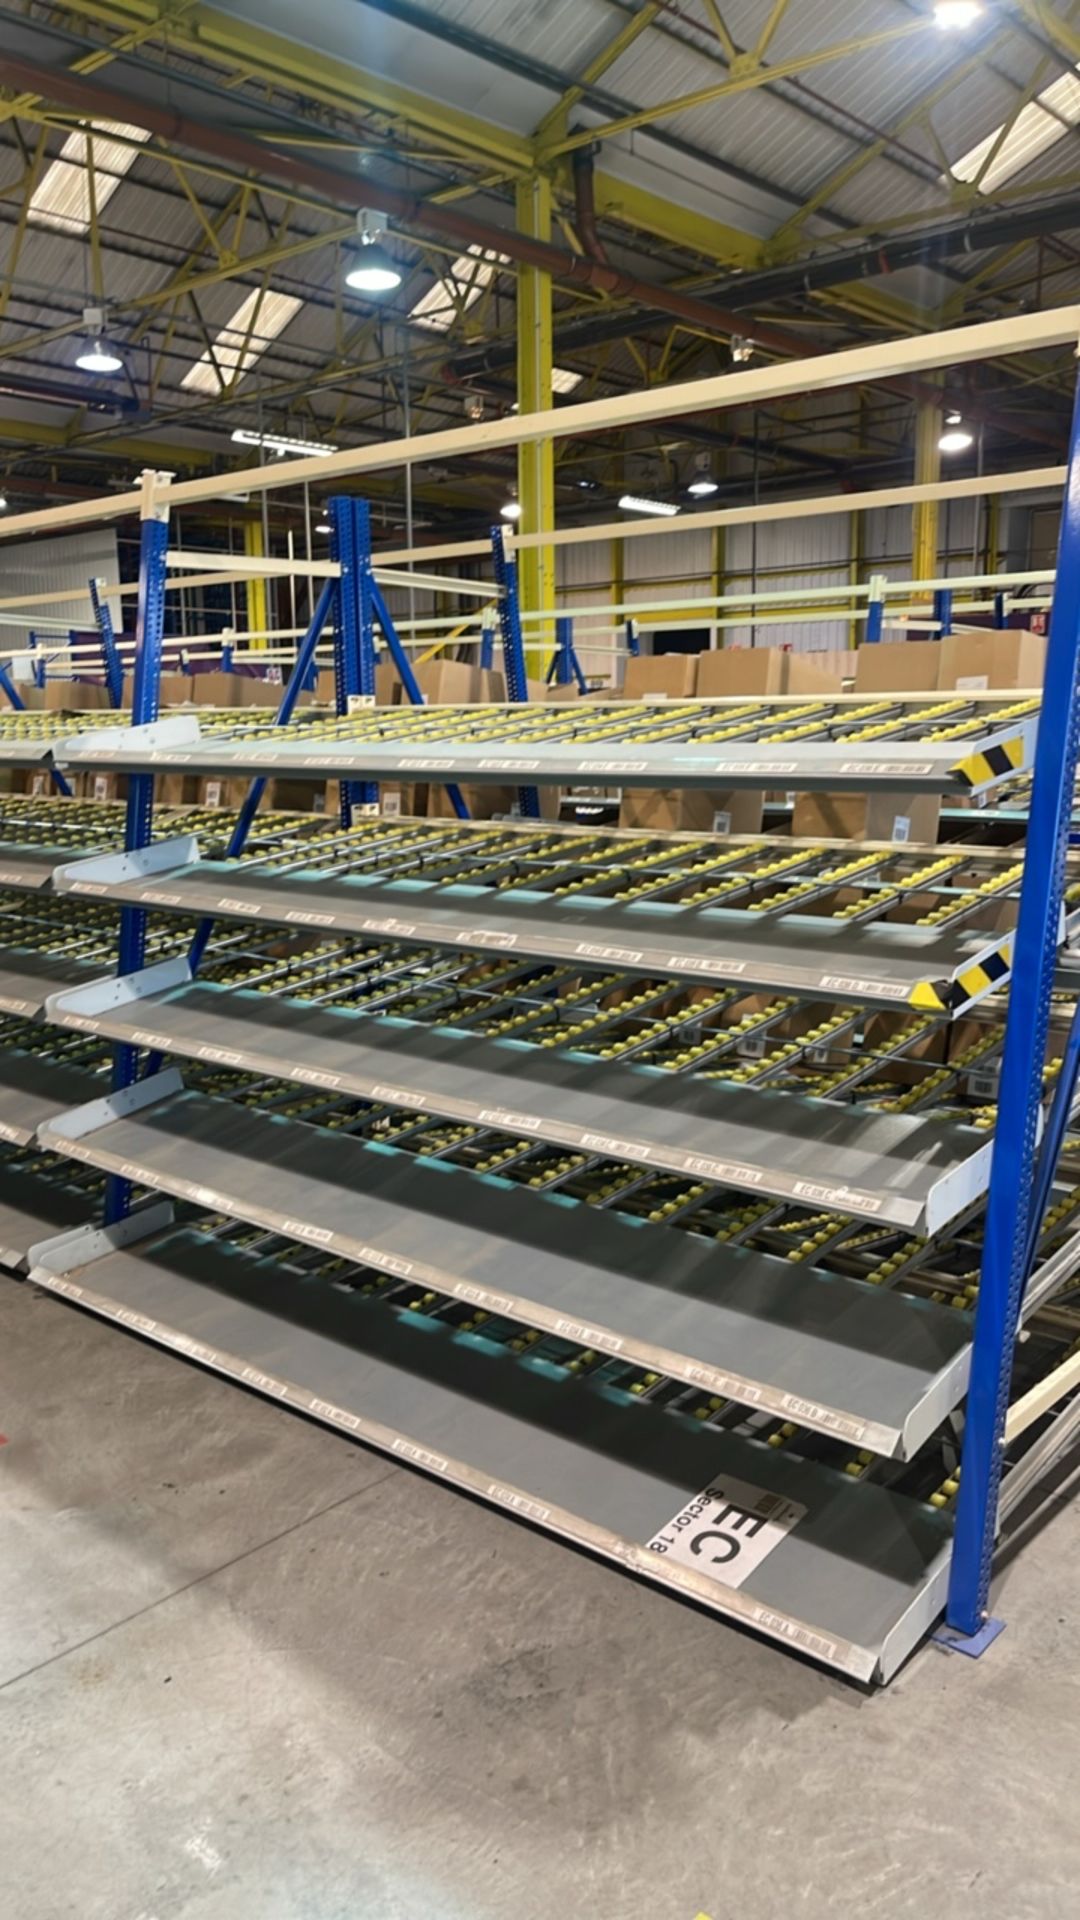 A Run Of 6 Bays Of Back To Back Flow Racks - Image 10 of 11